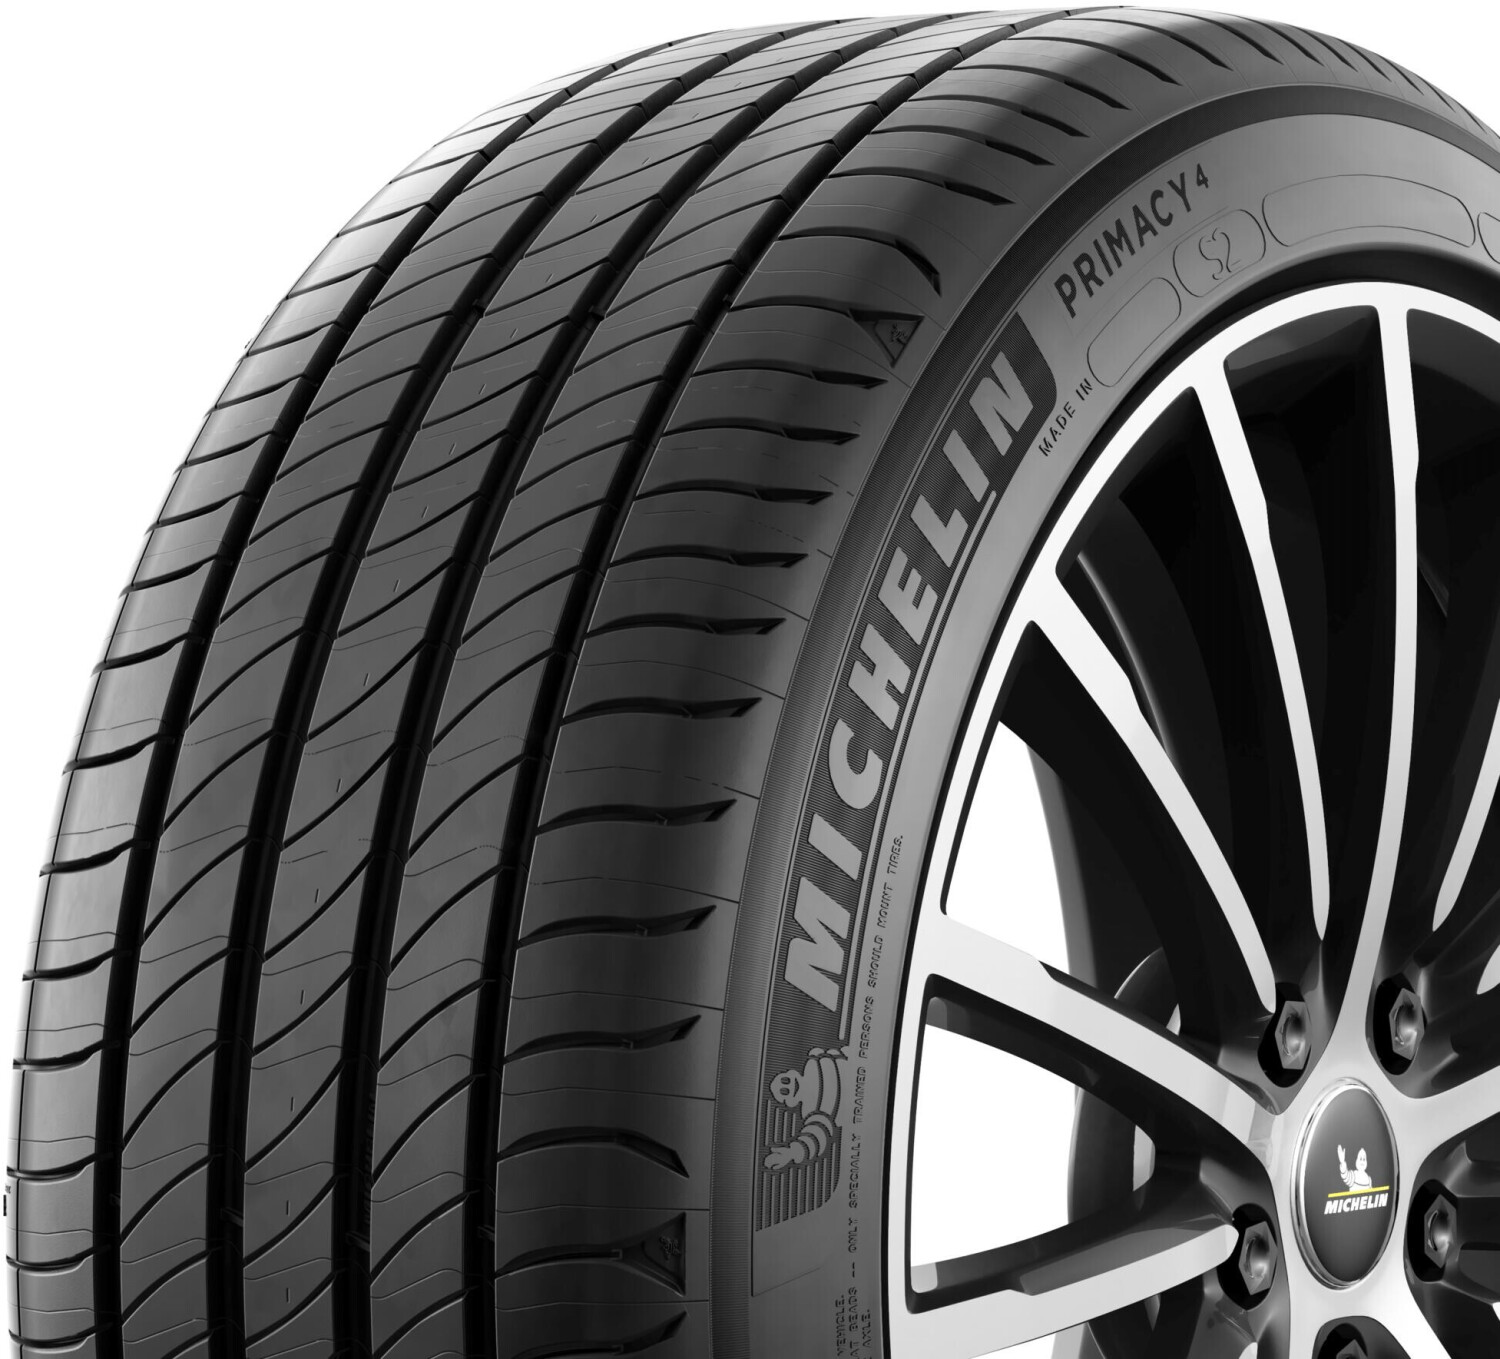 from R17 Best XL Primacy – Buy S1 (Today) £108.51 Deals 4 94V 225/45 on Michelin